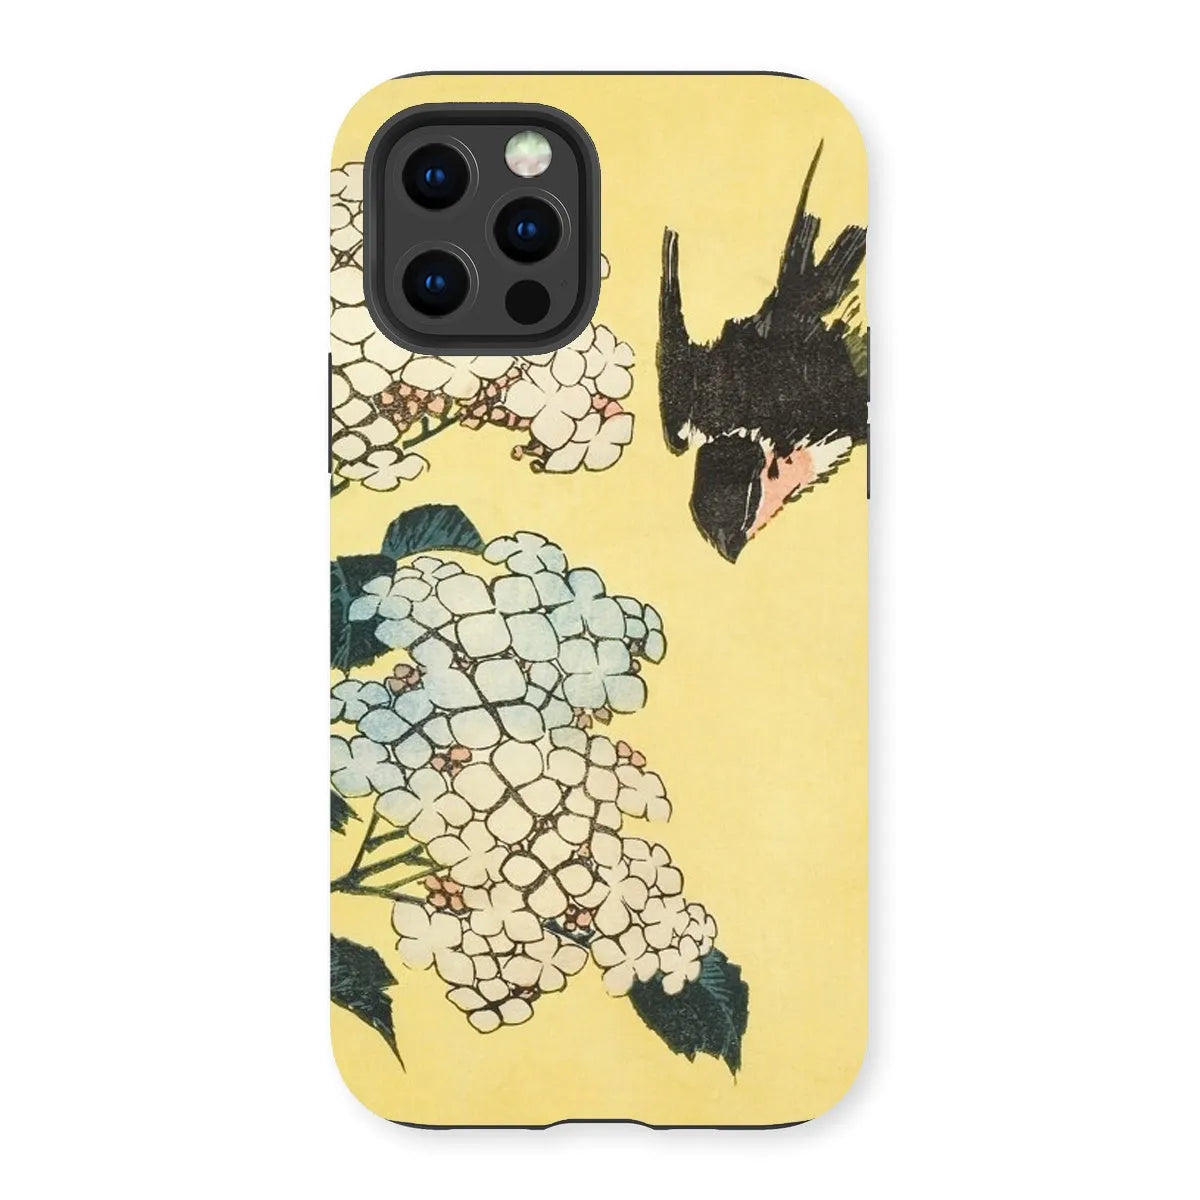 Hydrangea And Swallow - Japanese Art Phone Case - Hokusai - Iphone 13 Pro / Matte - Mobile Phone Cases - Aesthetic Art